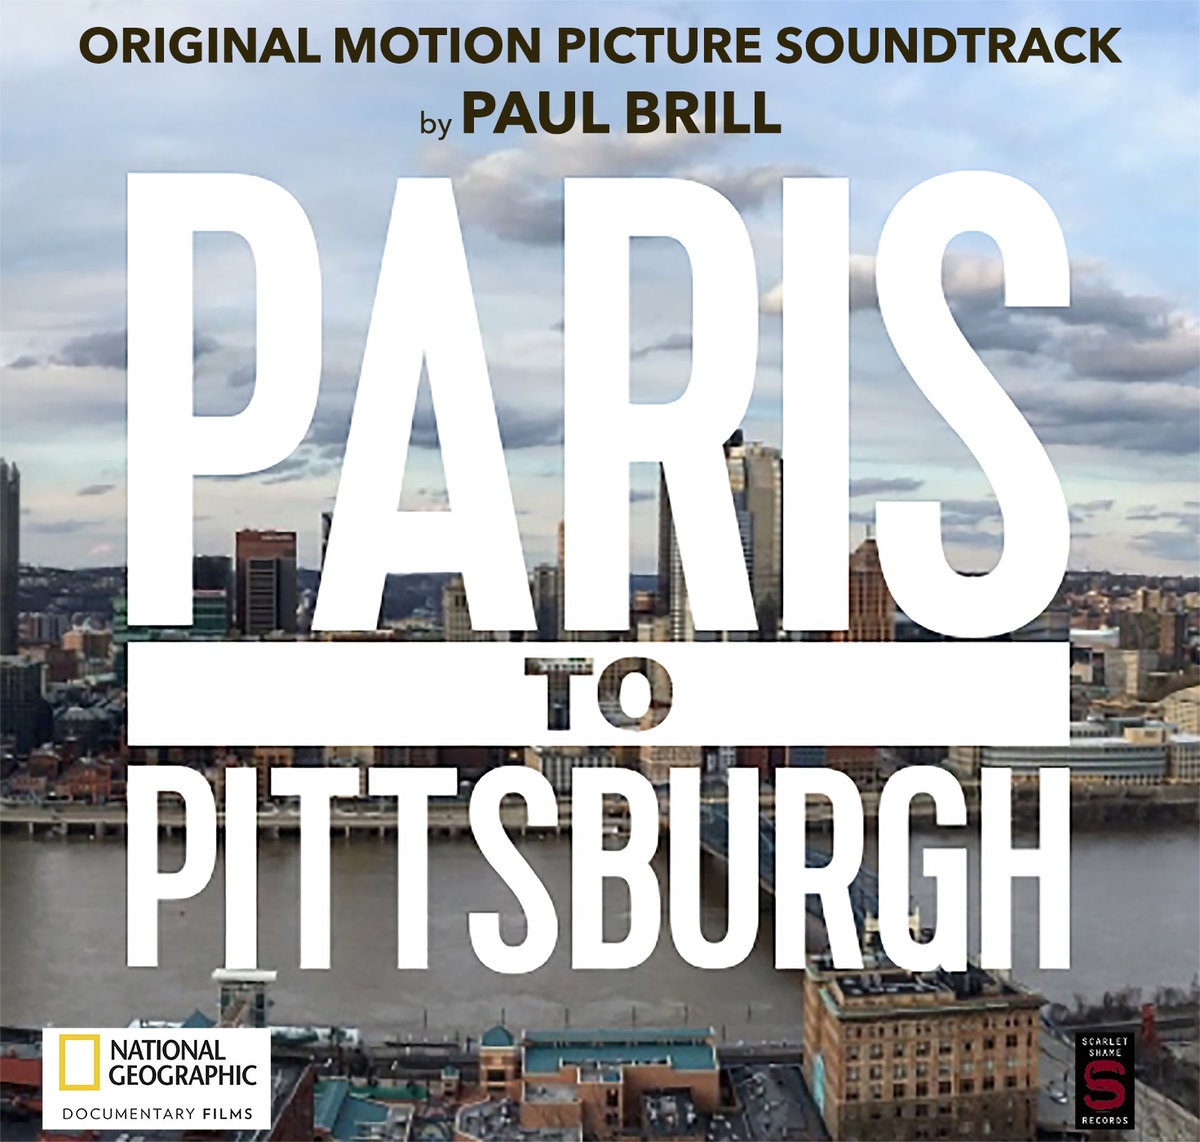 Special Screening of the film "Paris to Pittsburgh" with a discussion following the screening